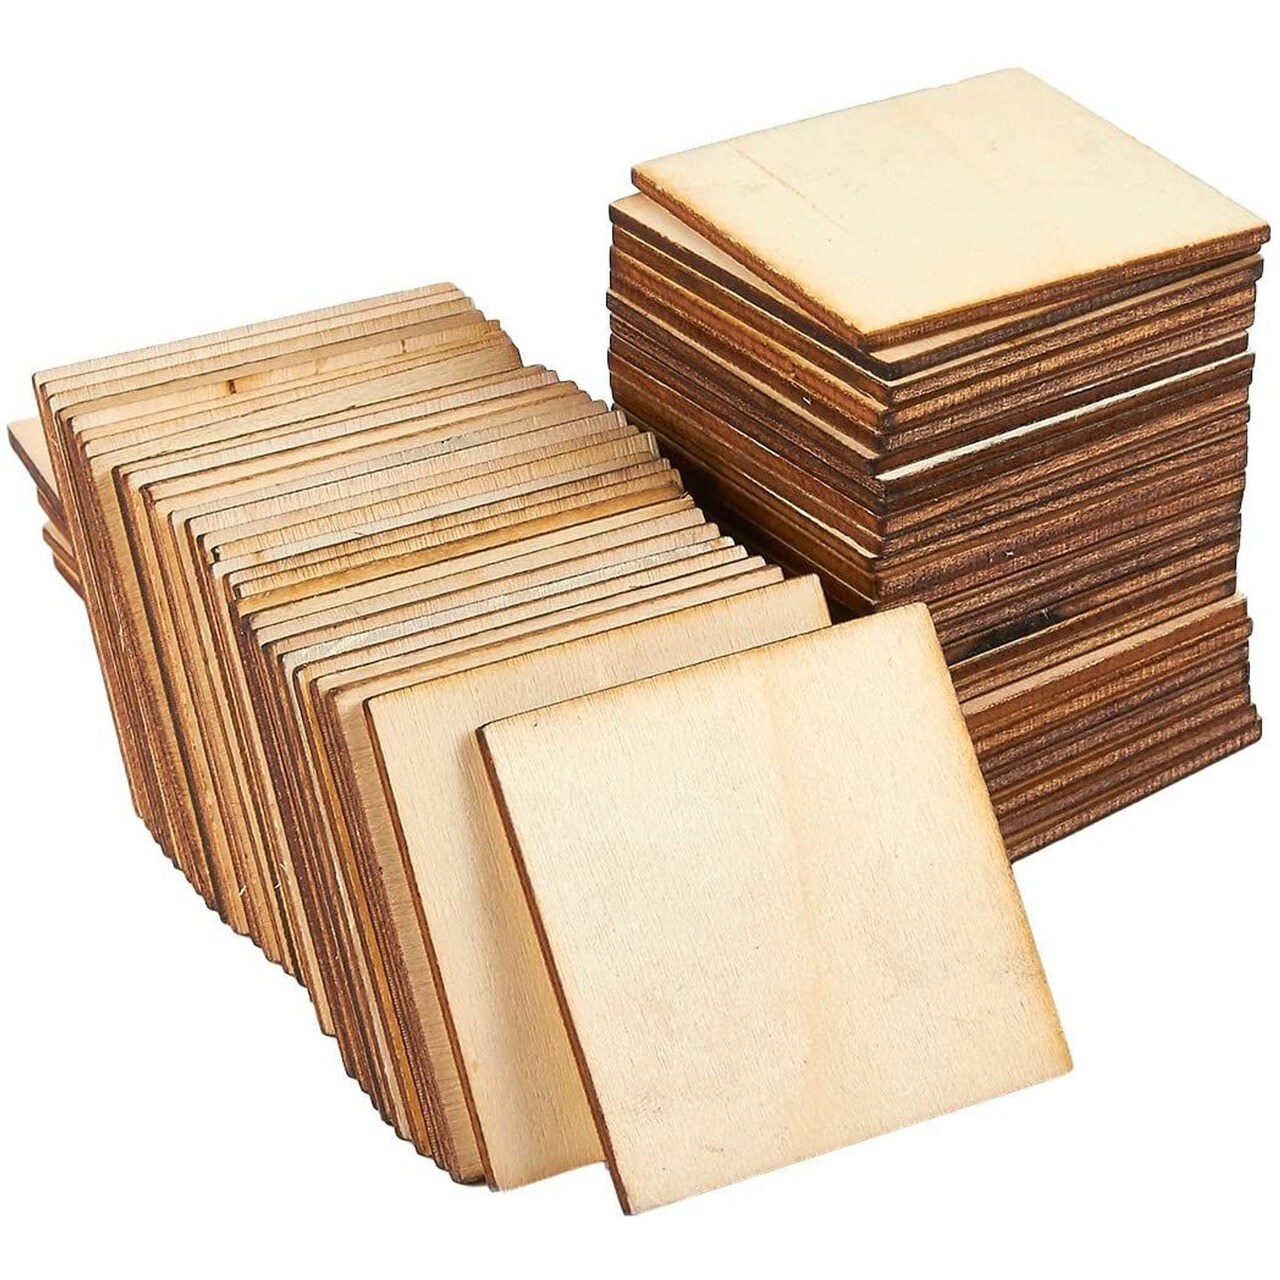 60 Pieces 2x2 Wood Squares for DIY Crafts, Unfinished Wooden Cutout Tiles  for Painting